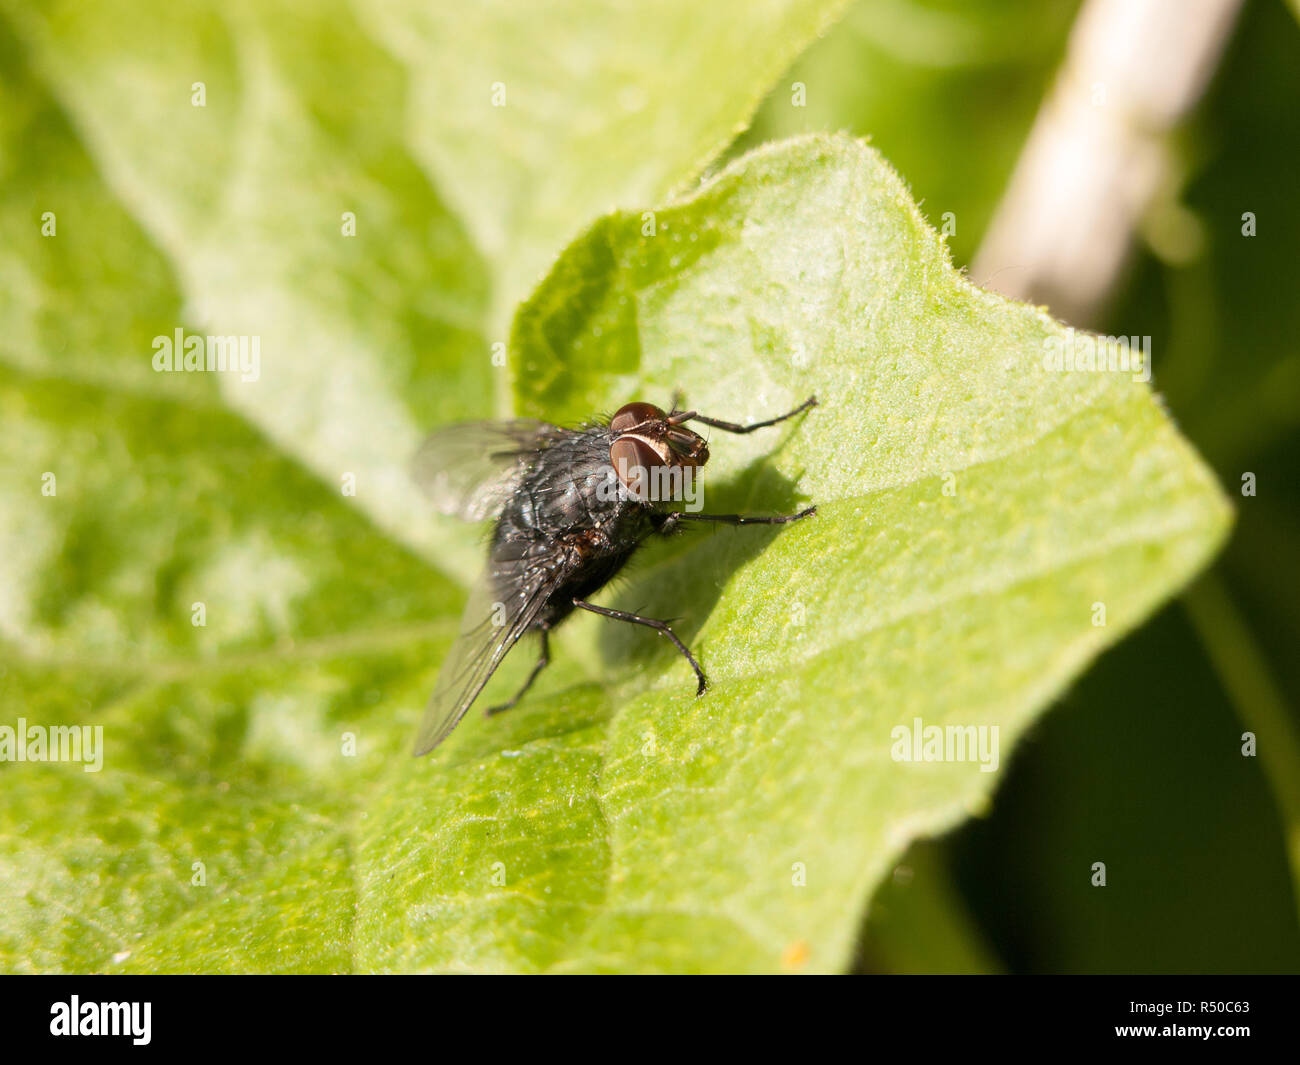 a black big fly with big brown eyes clear crisp sharp close up